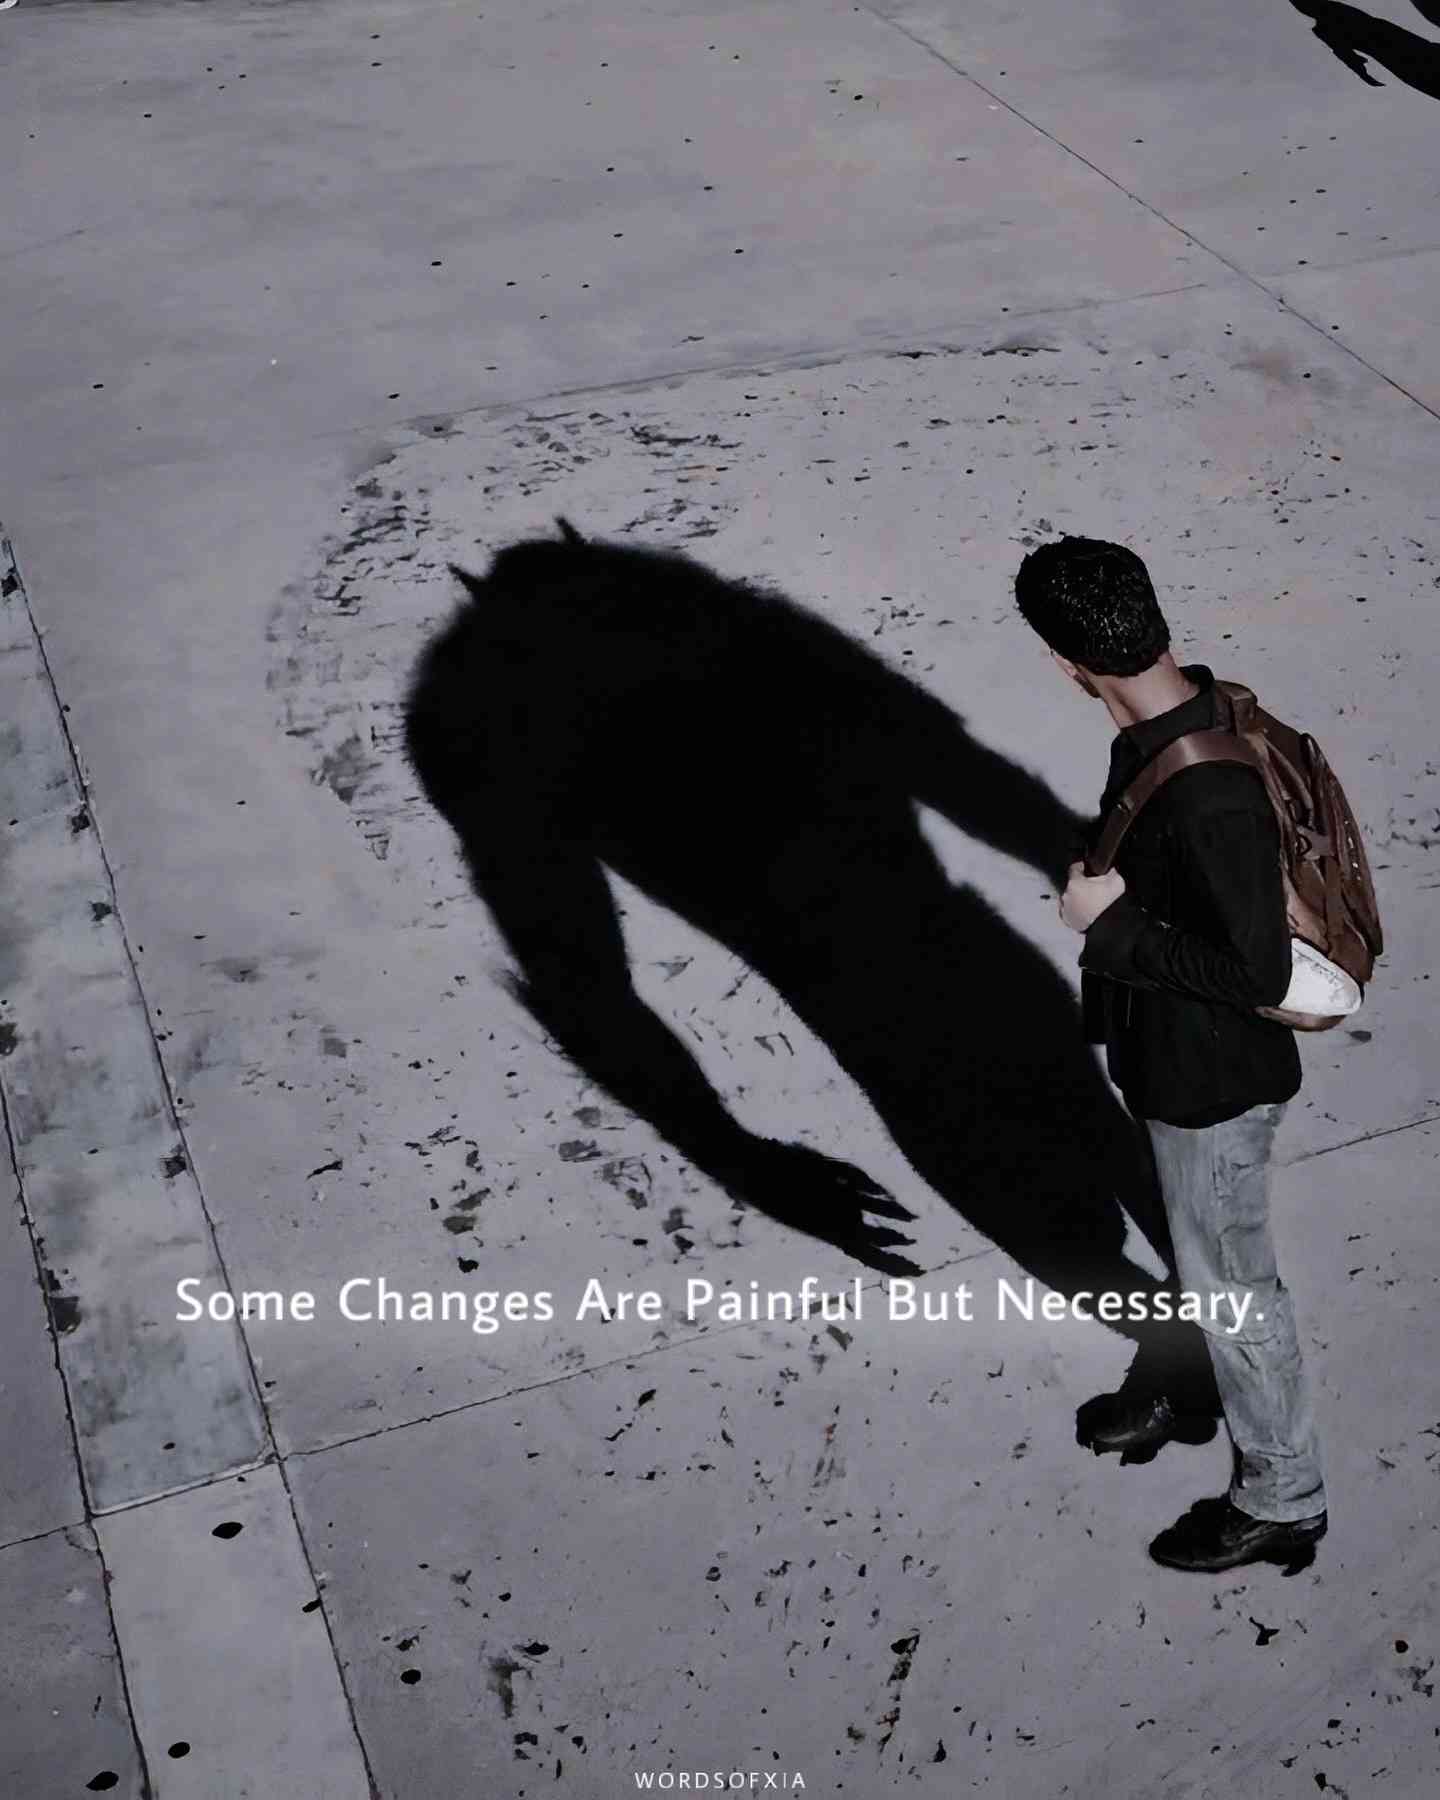 Some changes are painful - Picture quotes - MirrorLog